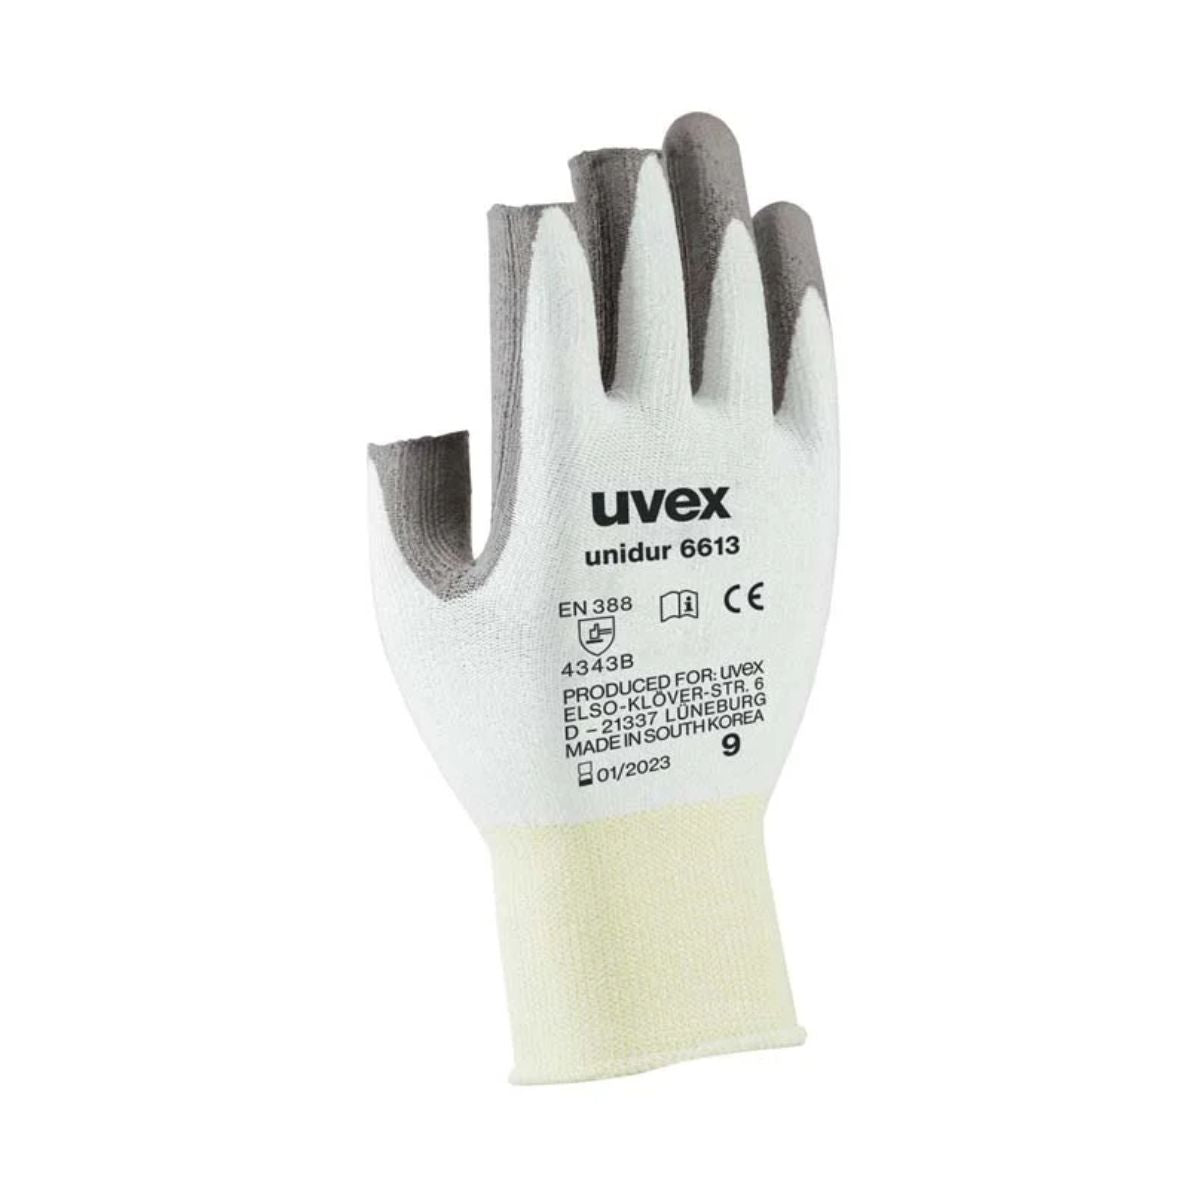 uvex Unidur Cut Protection Fingerless Glove 6613 (Pack of 10)